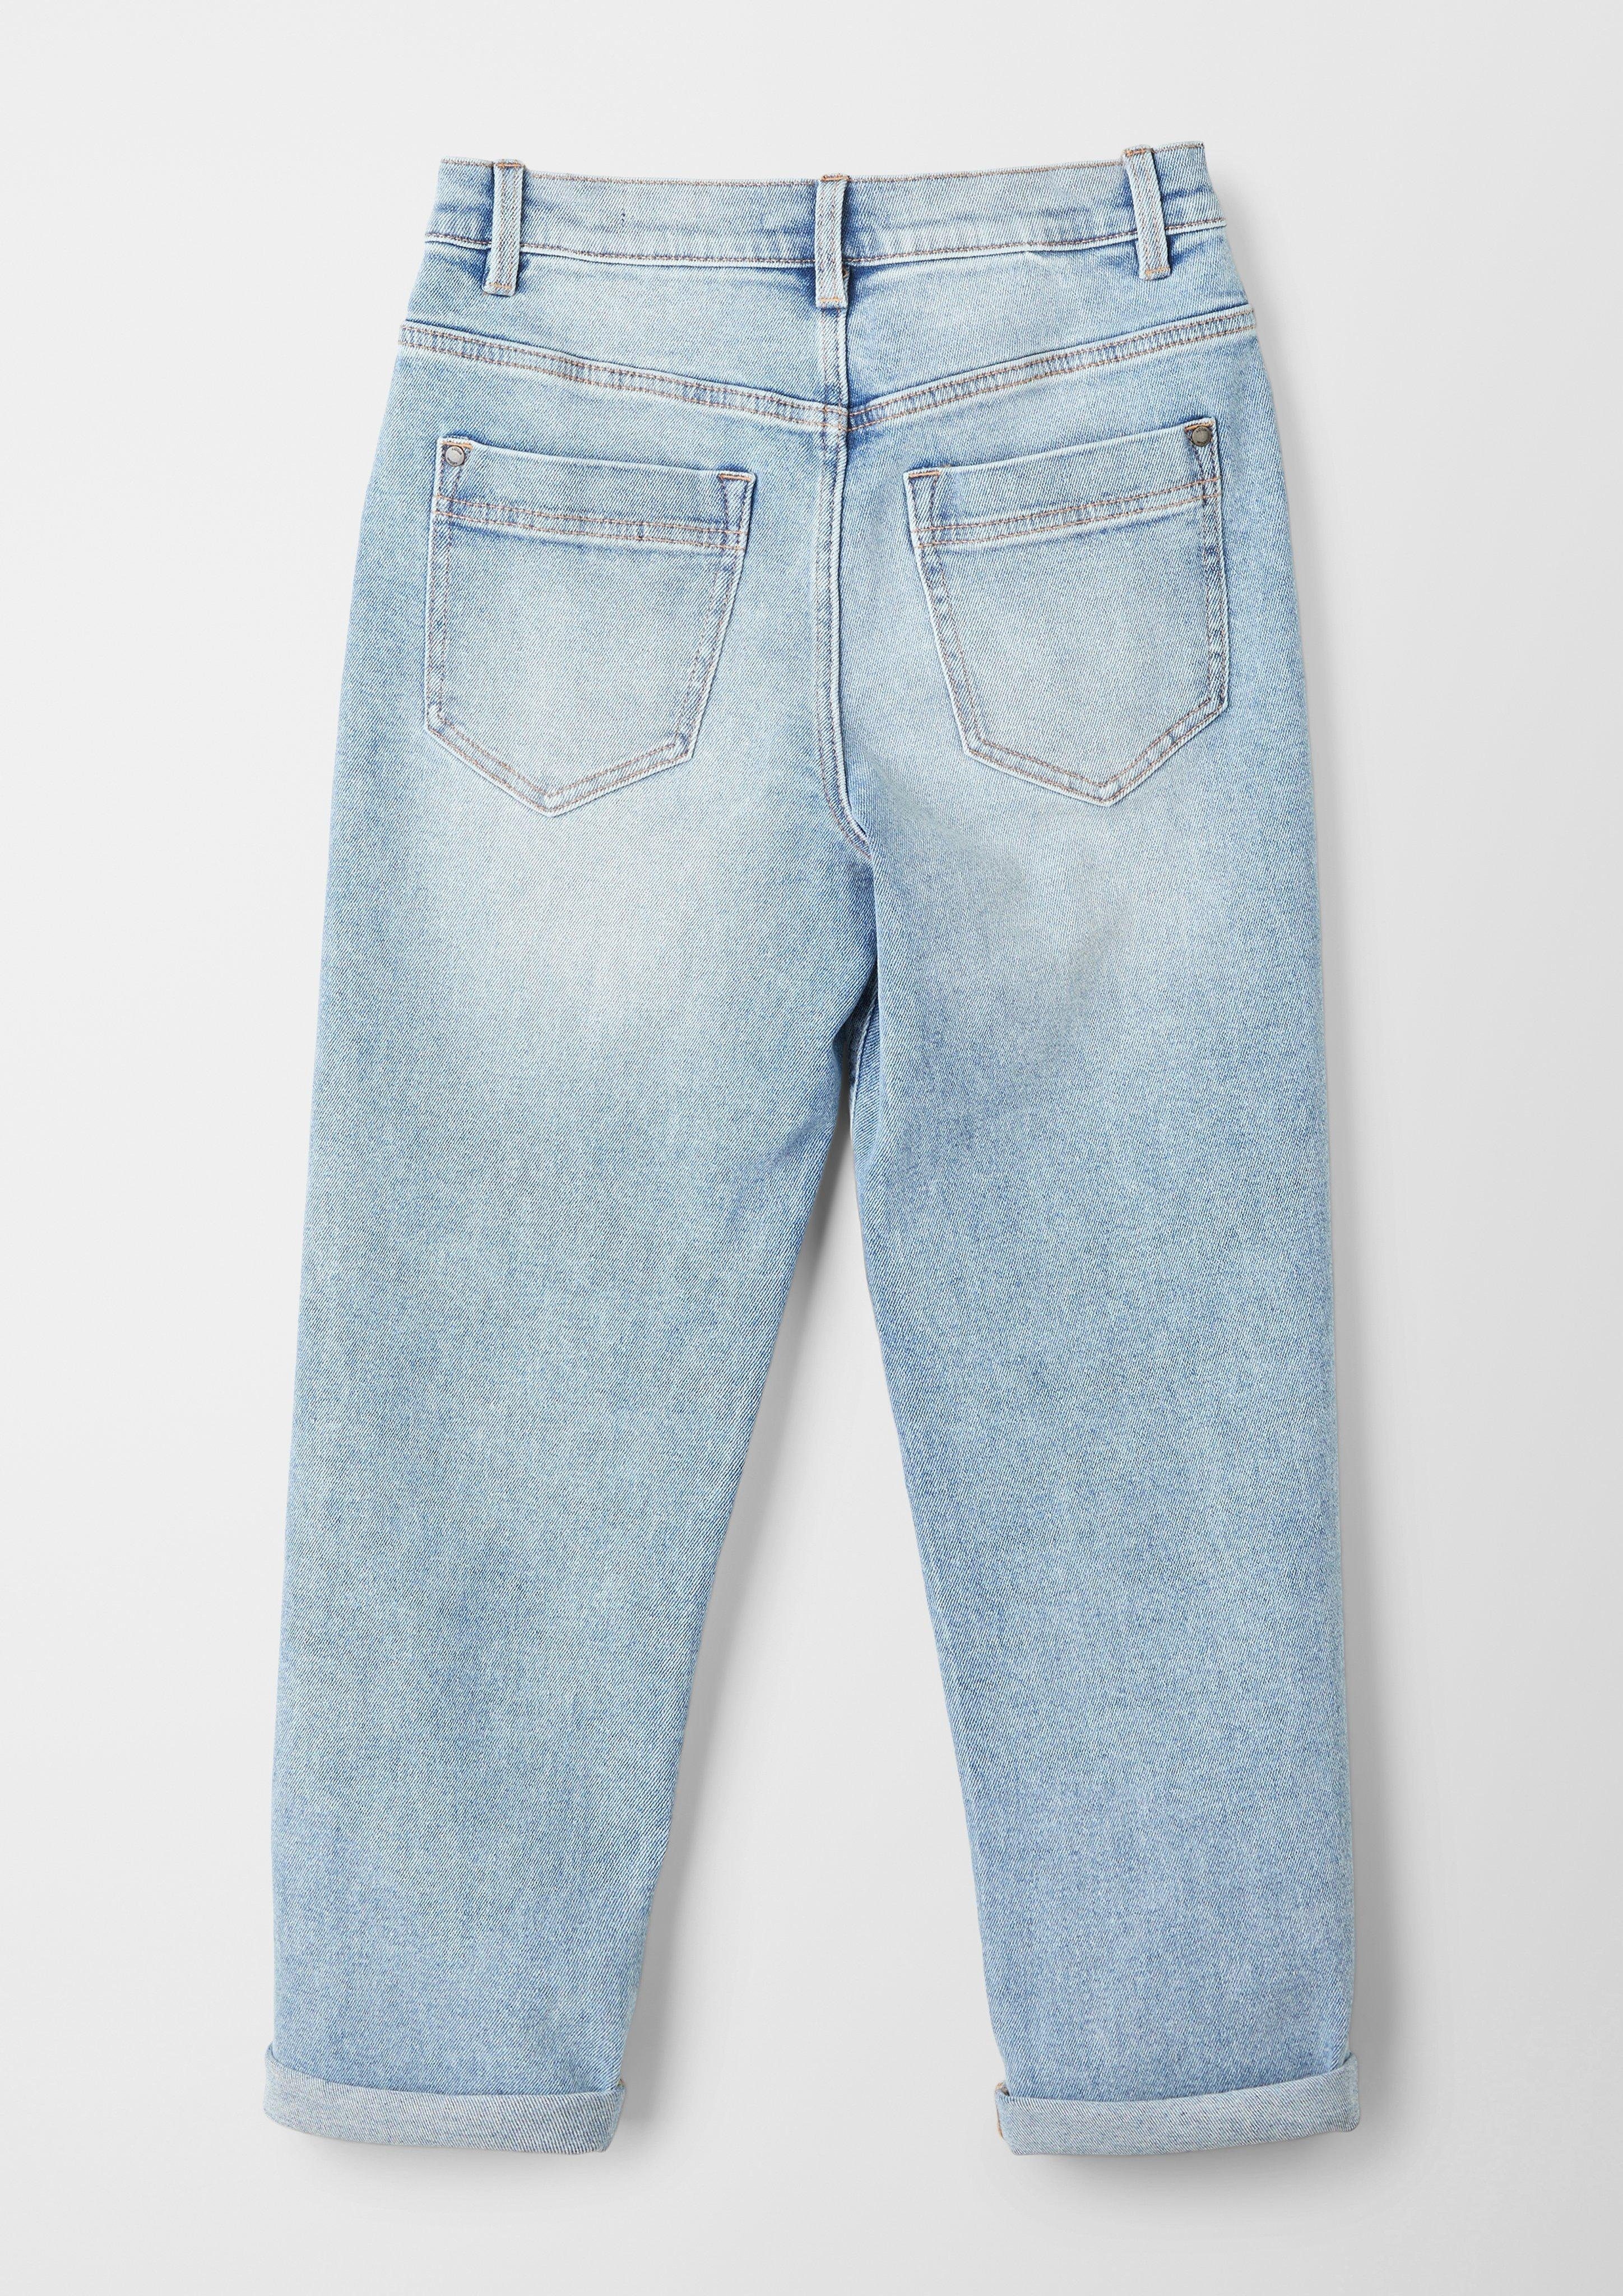 / s.Oliver Mid Jeans Tapered / Relaxed Waschung Rise / Leg Fit 5-Pocket-Jeans